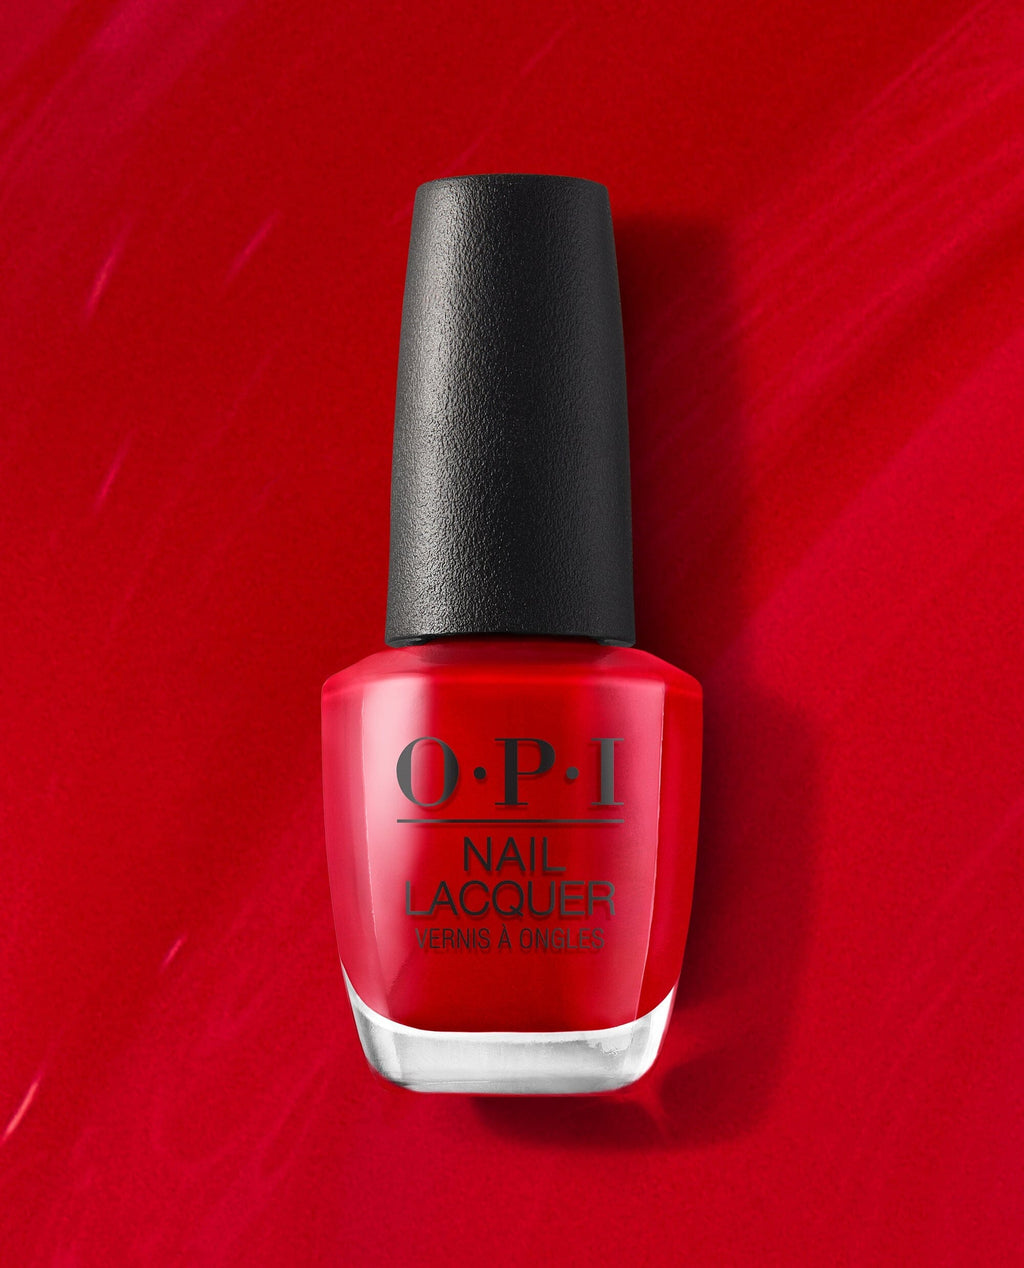 OPI - We are #OPIObsessed with this bright and shiny, red and creamy,  #BigAppleRed mani by @byheed. Try this Shade:   #ColorIsTheAnswer #NailArtist #NailTechLife #RedNails #OPIPro #RedMani  #OPIObsessed #TimelessMani #NailObsessed